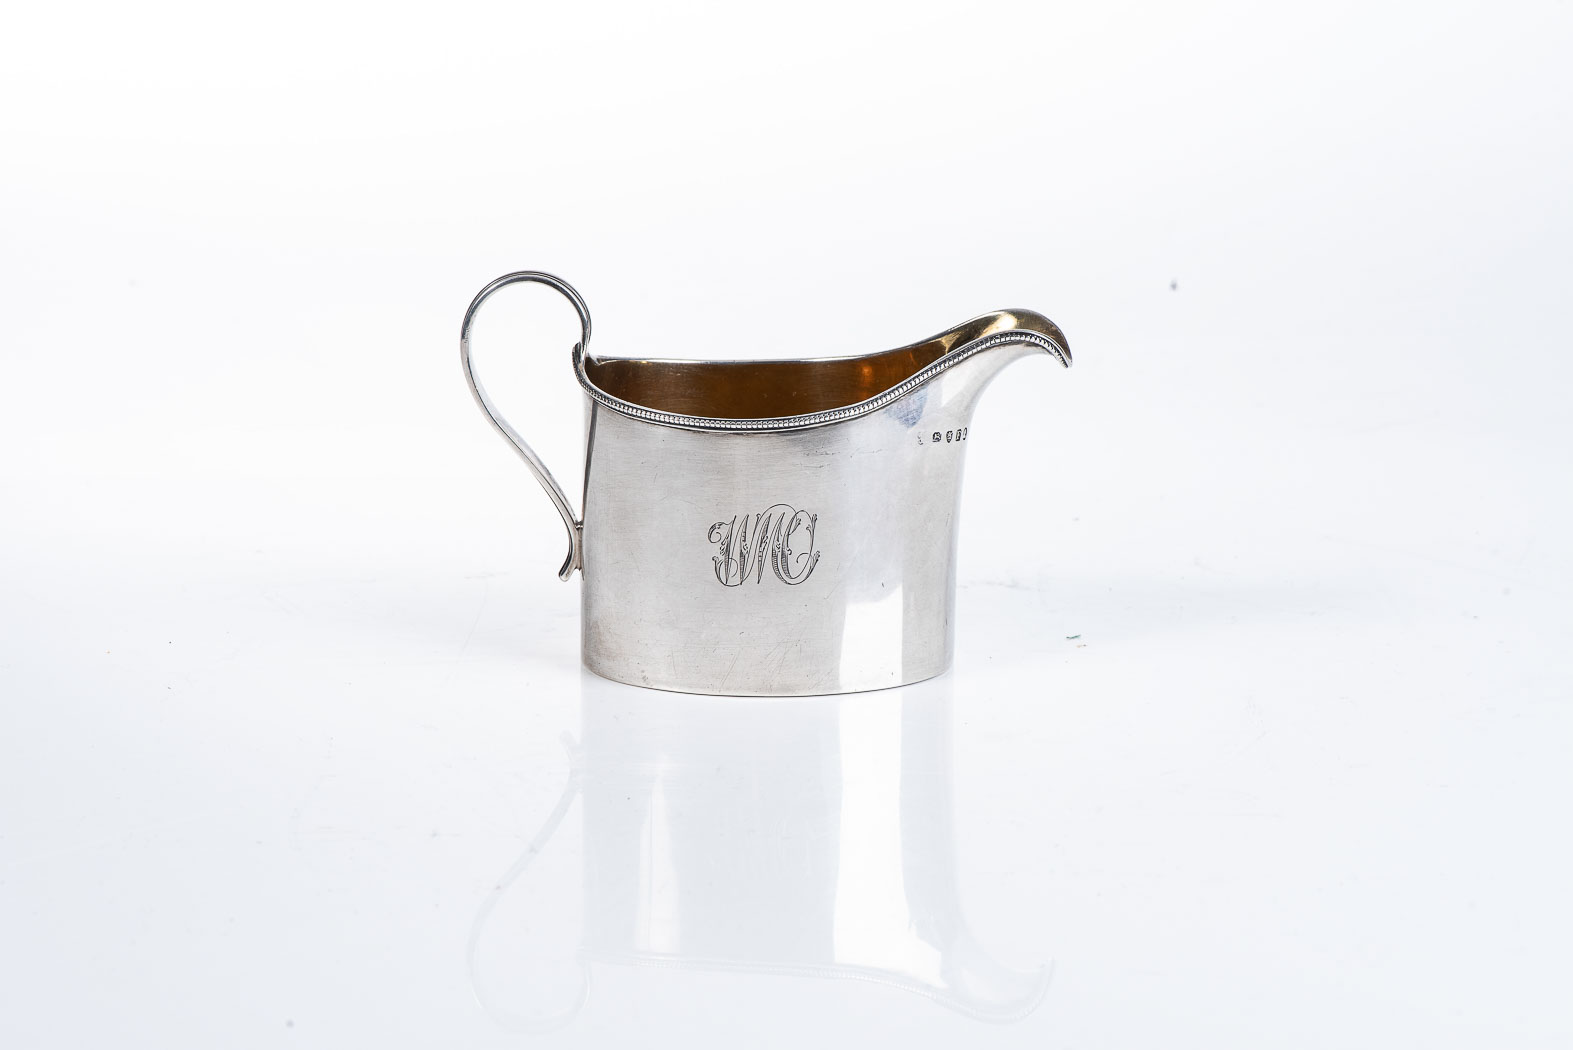 A GEORGE III SILVER CREAMER, MAKER'S MARK RUBBED, LONDON 1801 Beaded rim, reeded handle, gilt